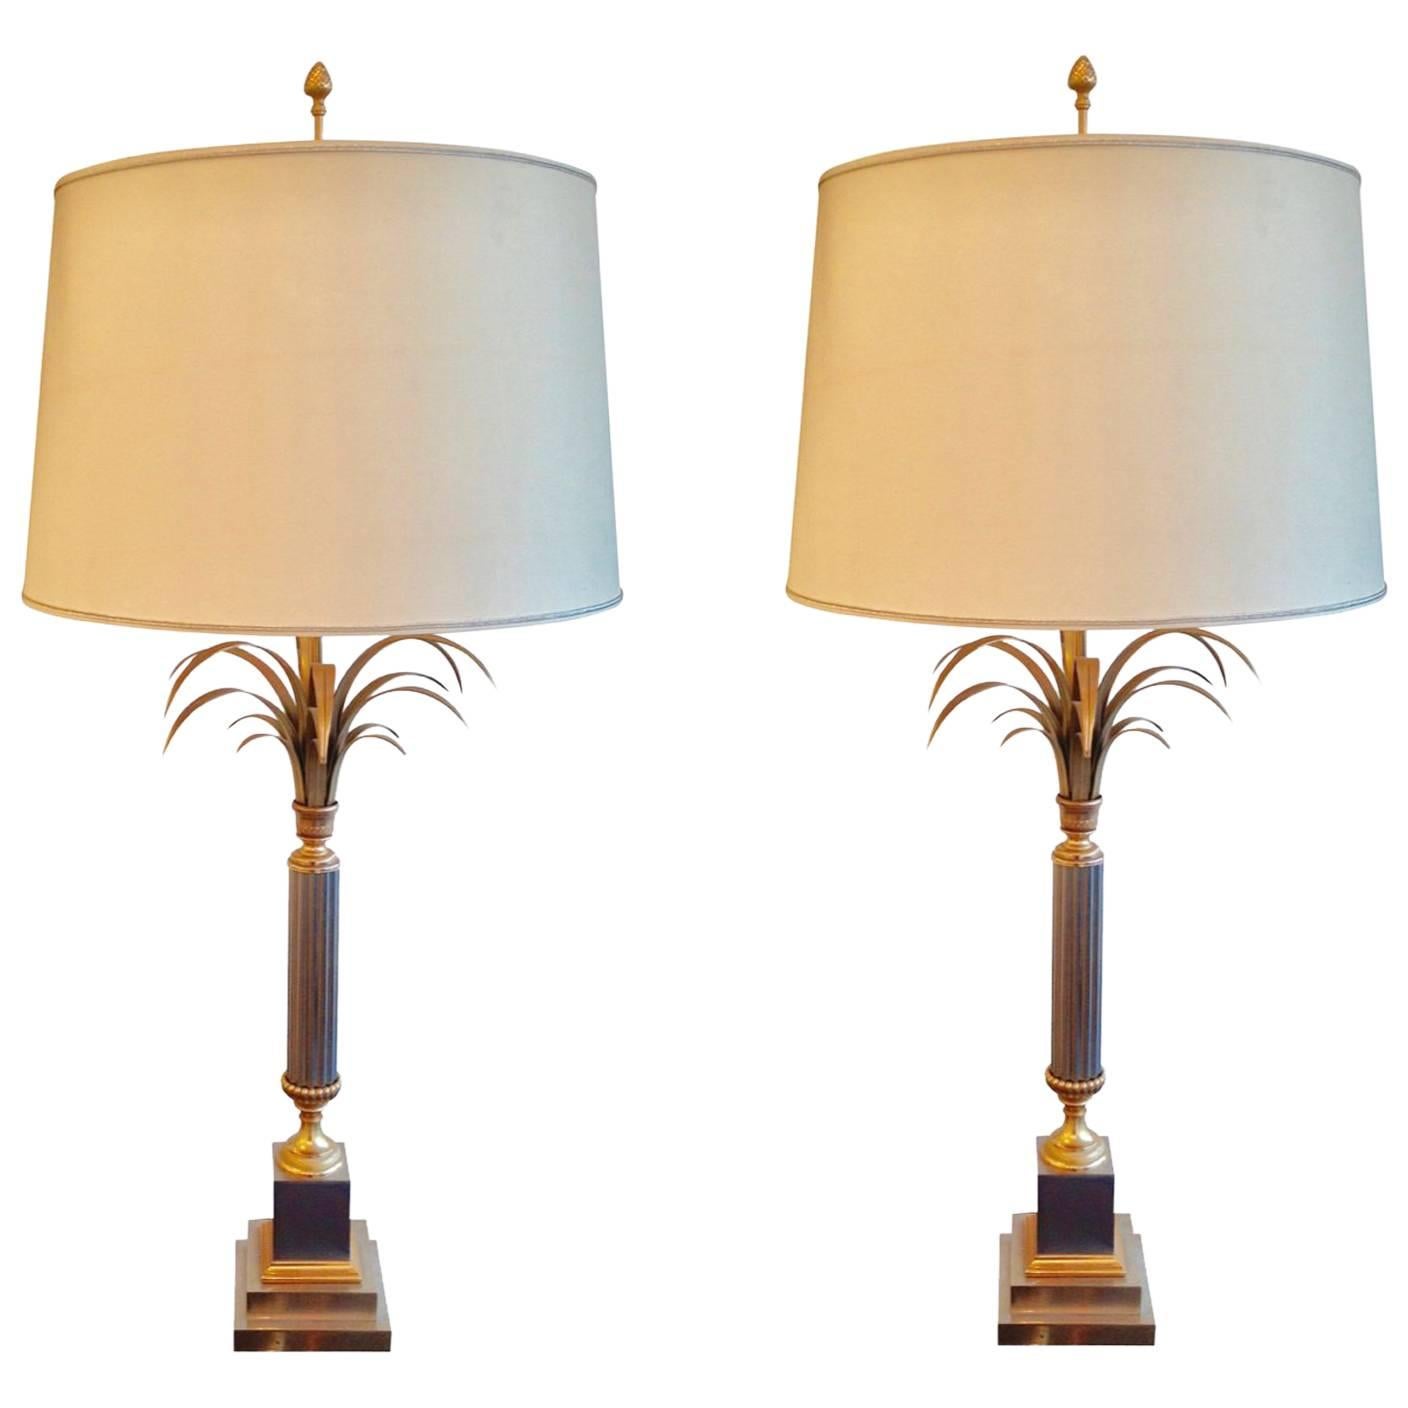 Pair of Large French Palm Tree Lamps